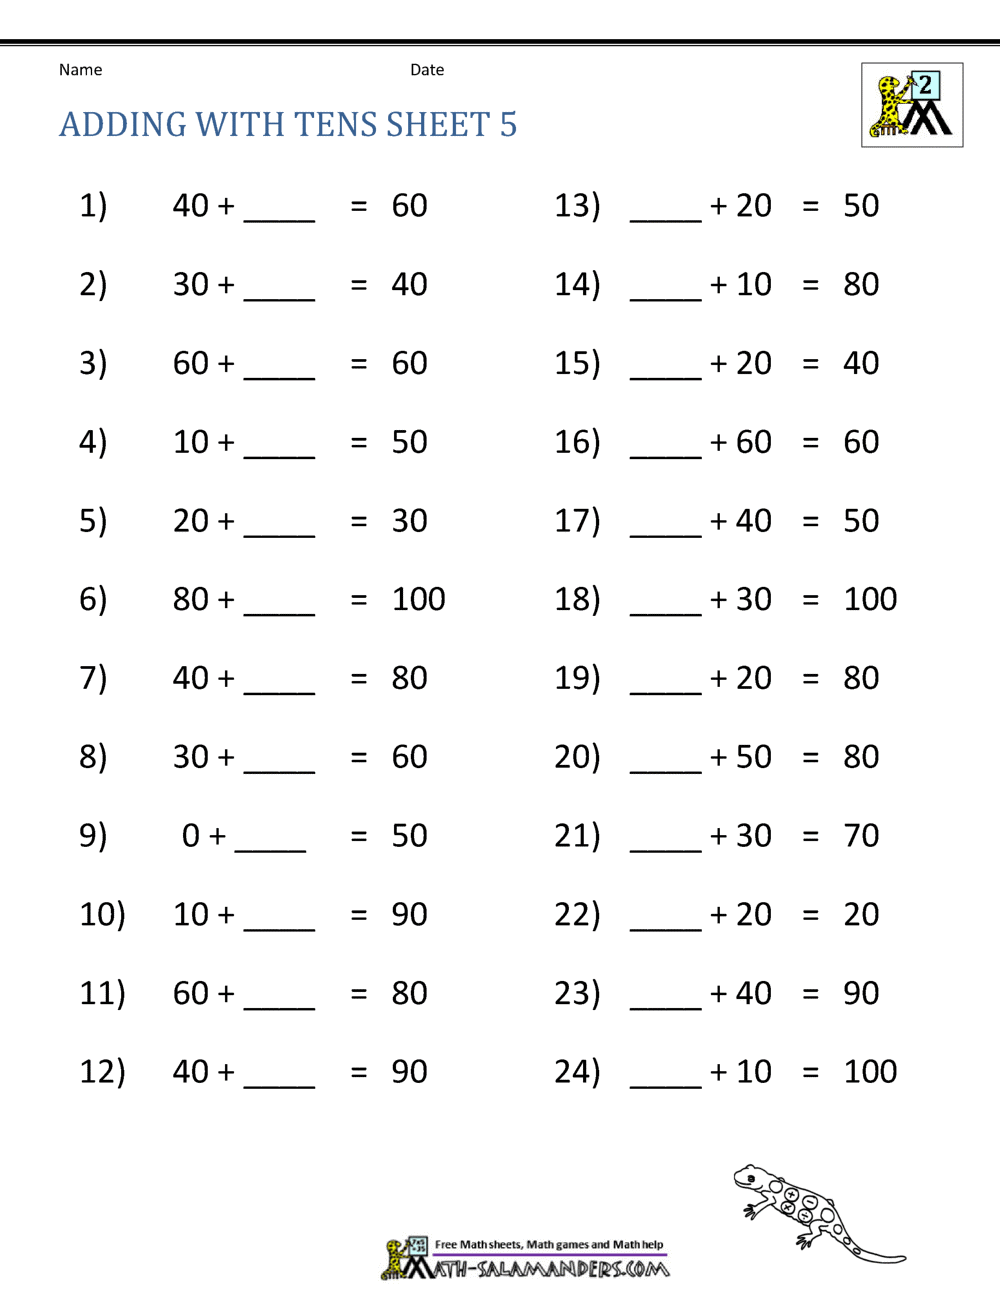 add-10-to-a-number-worksheets-worksheetscity